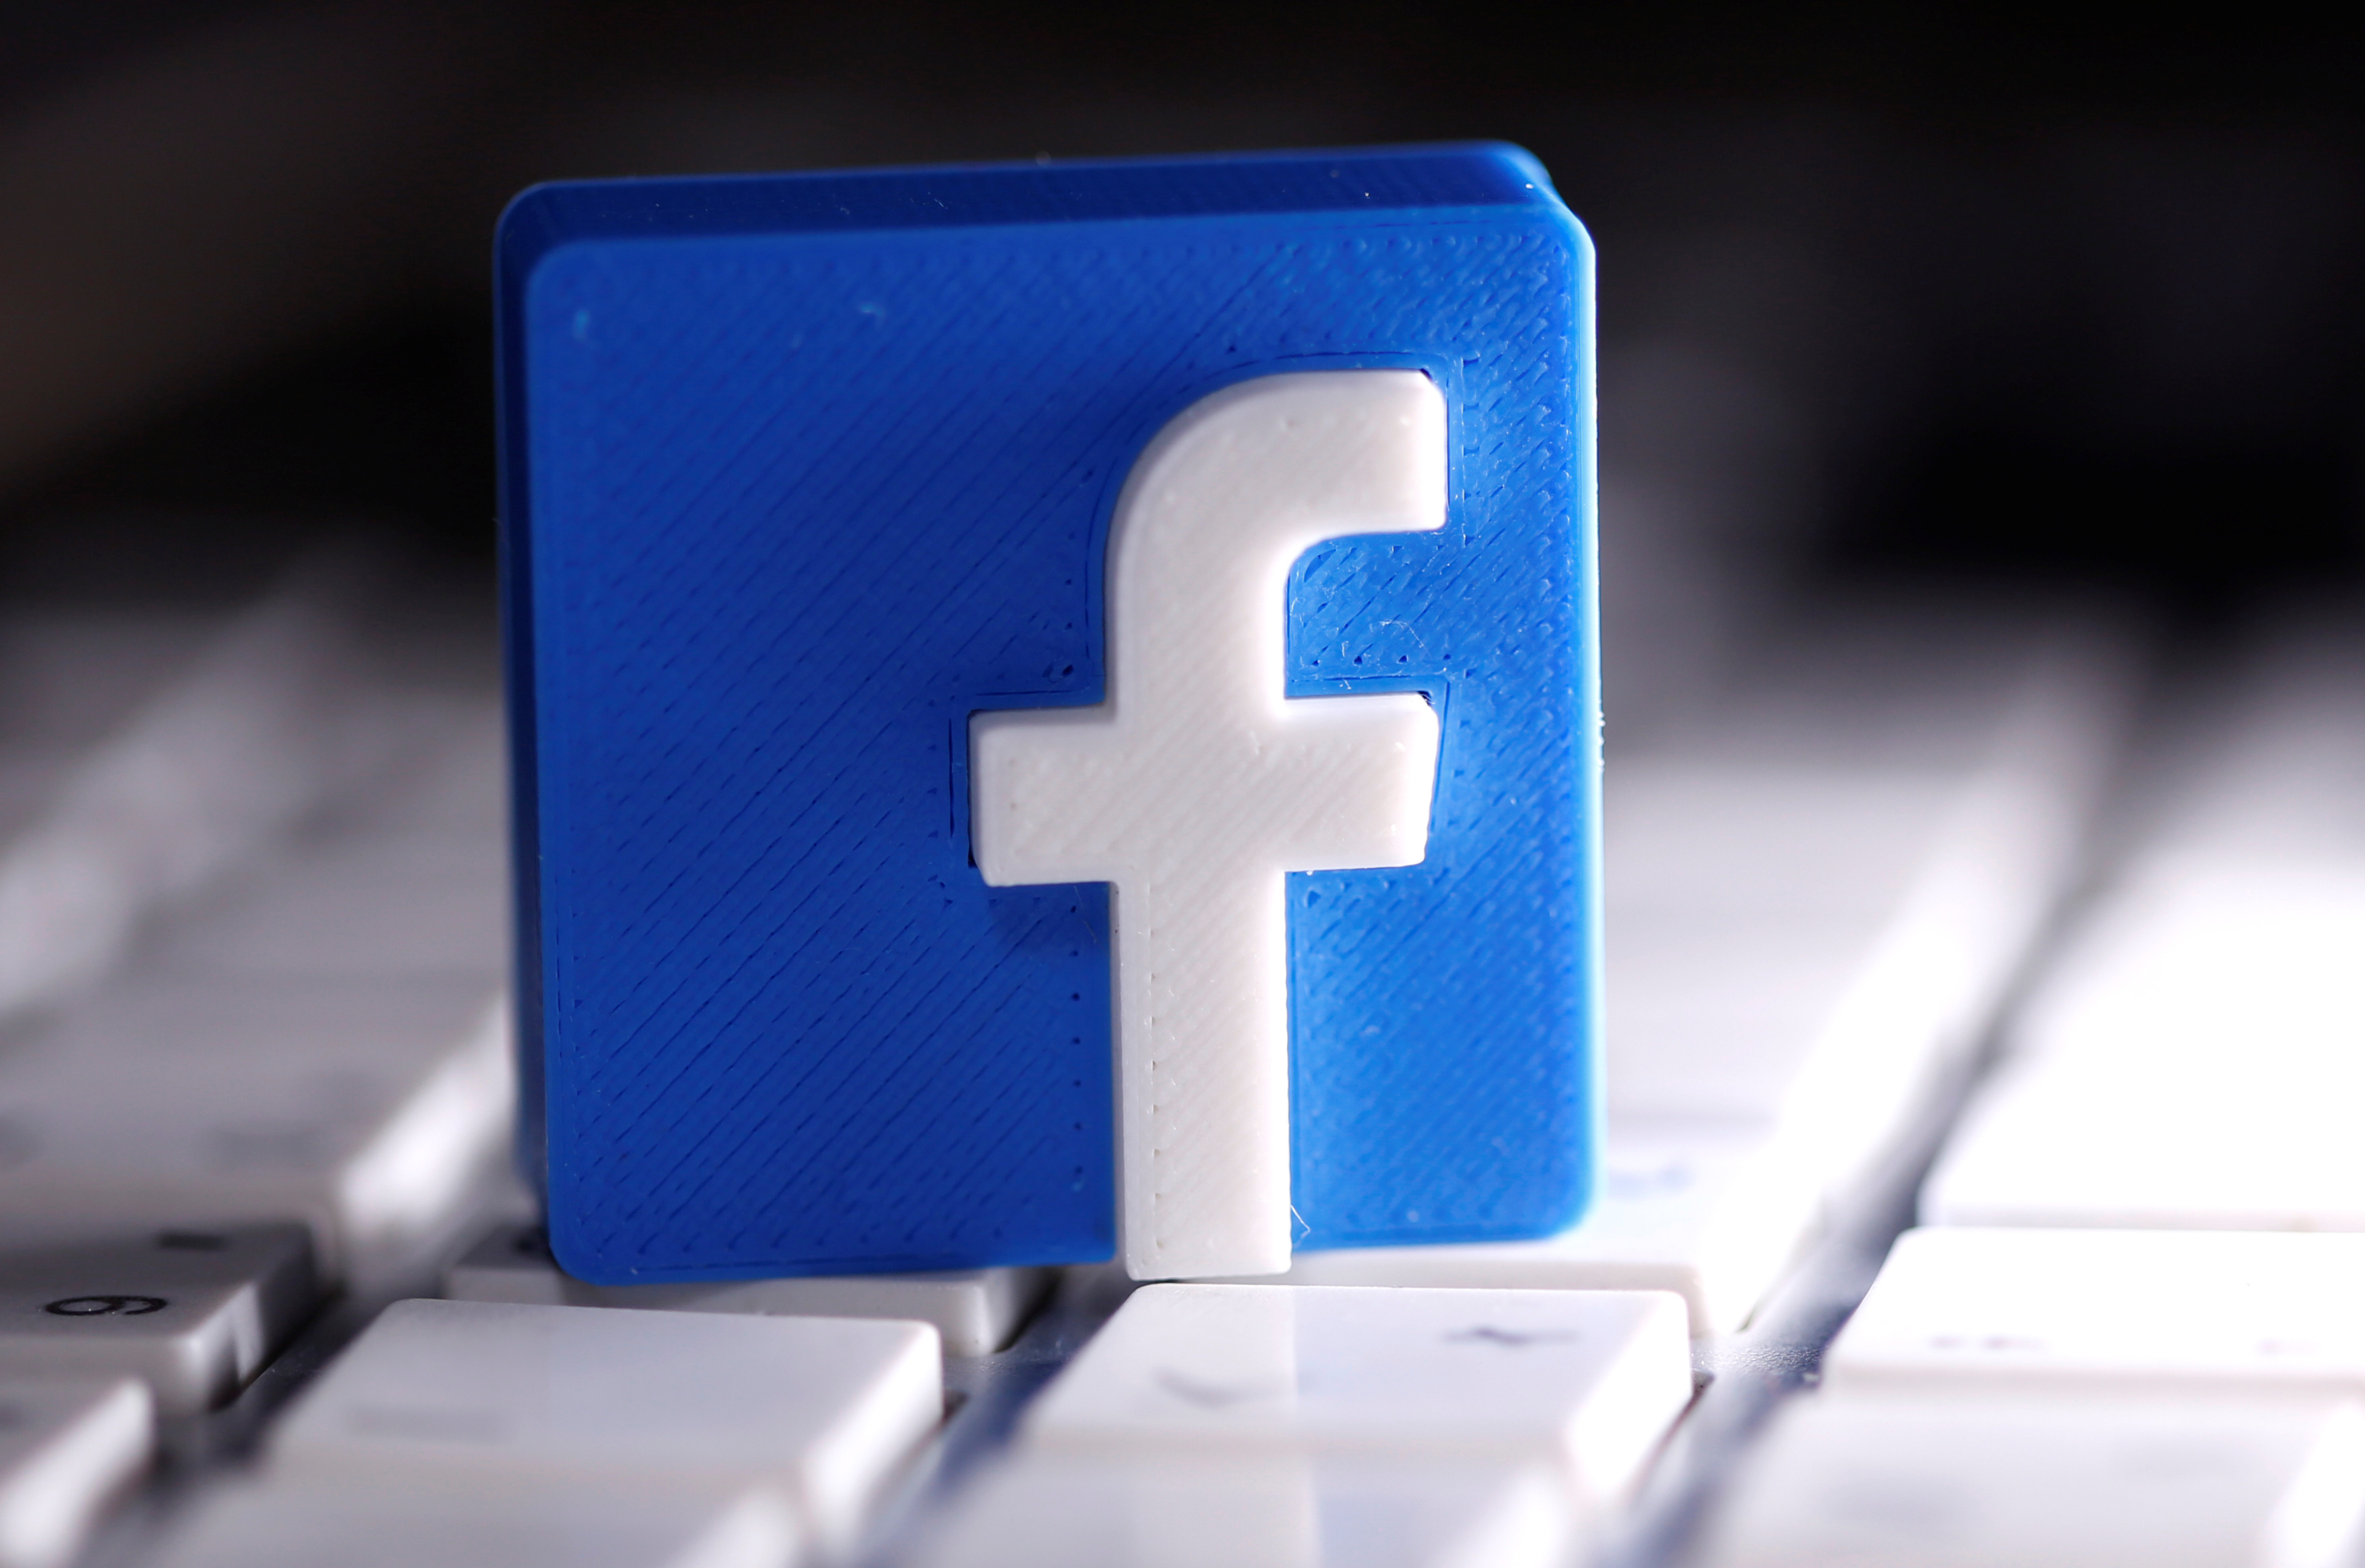 A 3D-printed Facebook logo is seen placed on a keyboard in this illustration